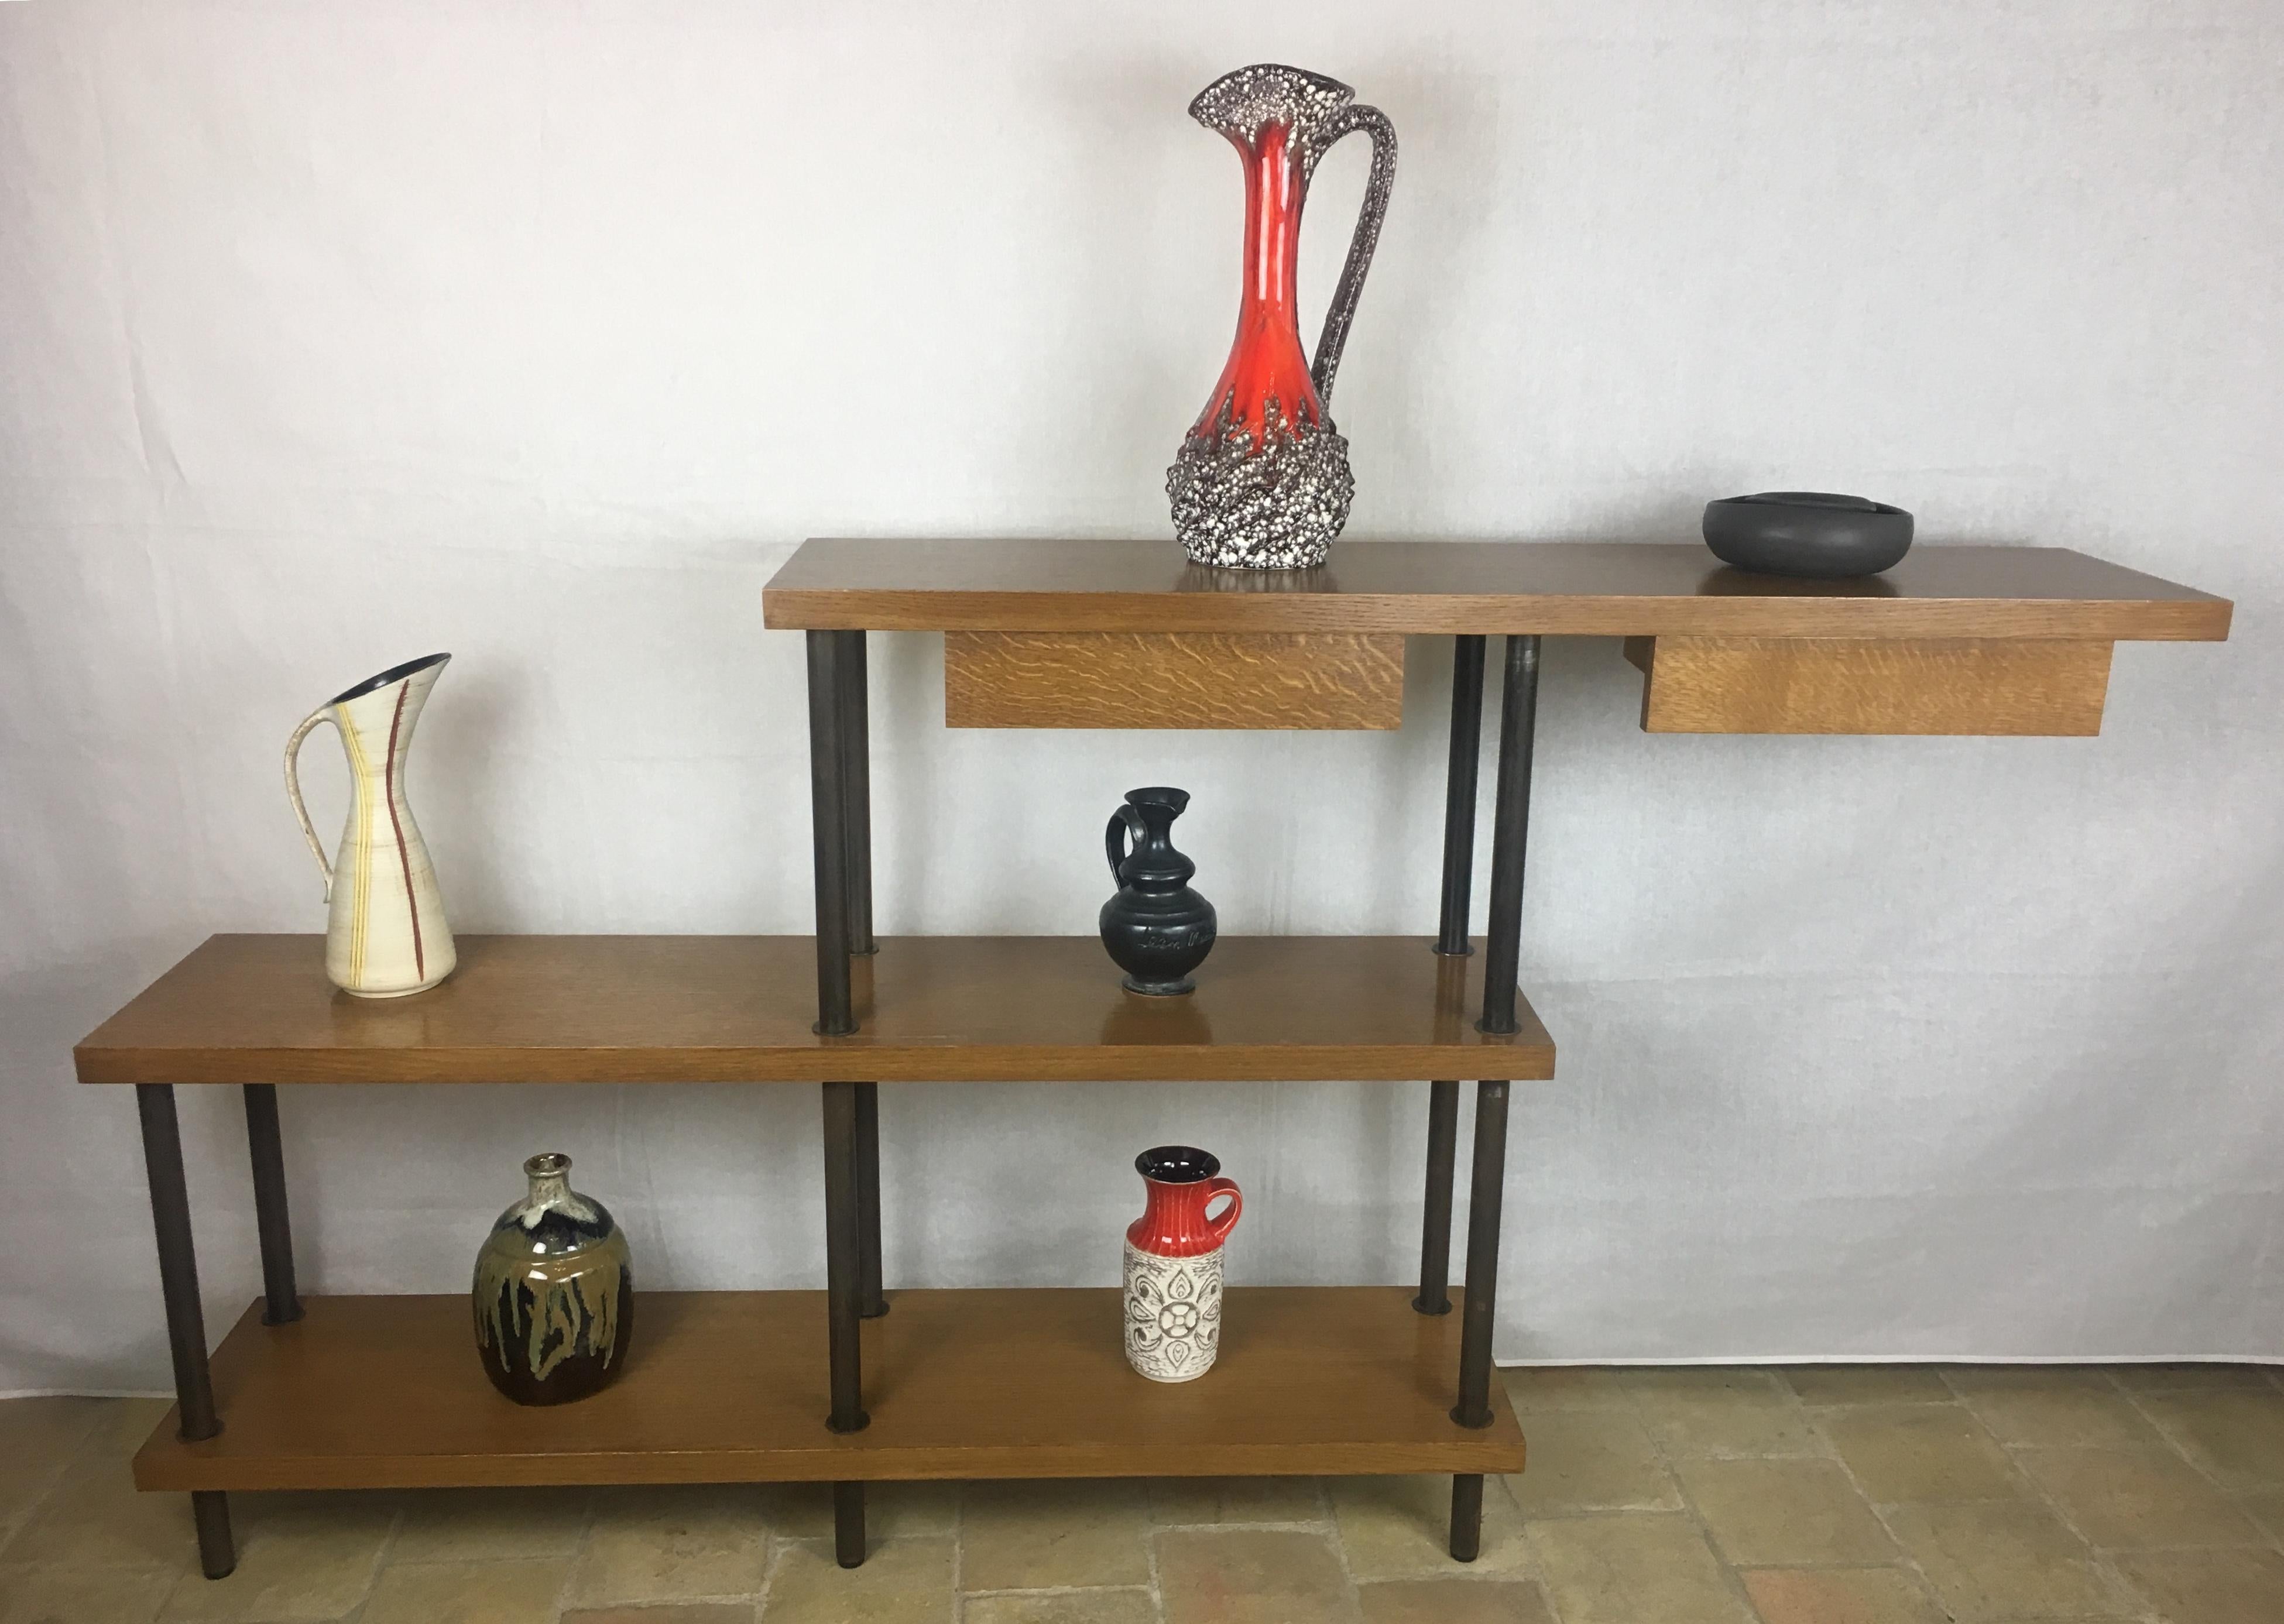 Solid oak and iron on this 1950s McCobb style bookshelf or freestanding display unit.
Excellent condition.

The iron has a beautiful patina and would great in any midcentury or contemporary space. 
Drawers can be positioned on either side of the top